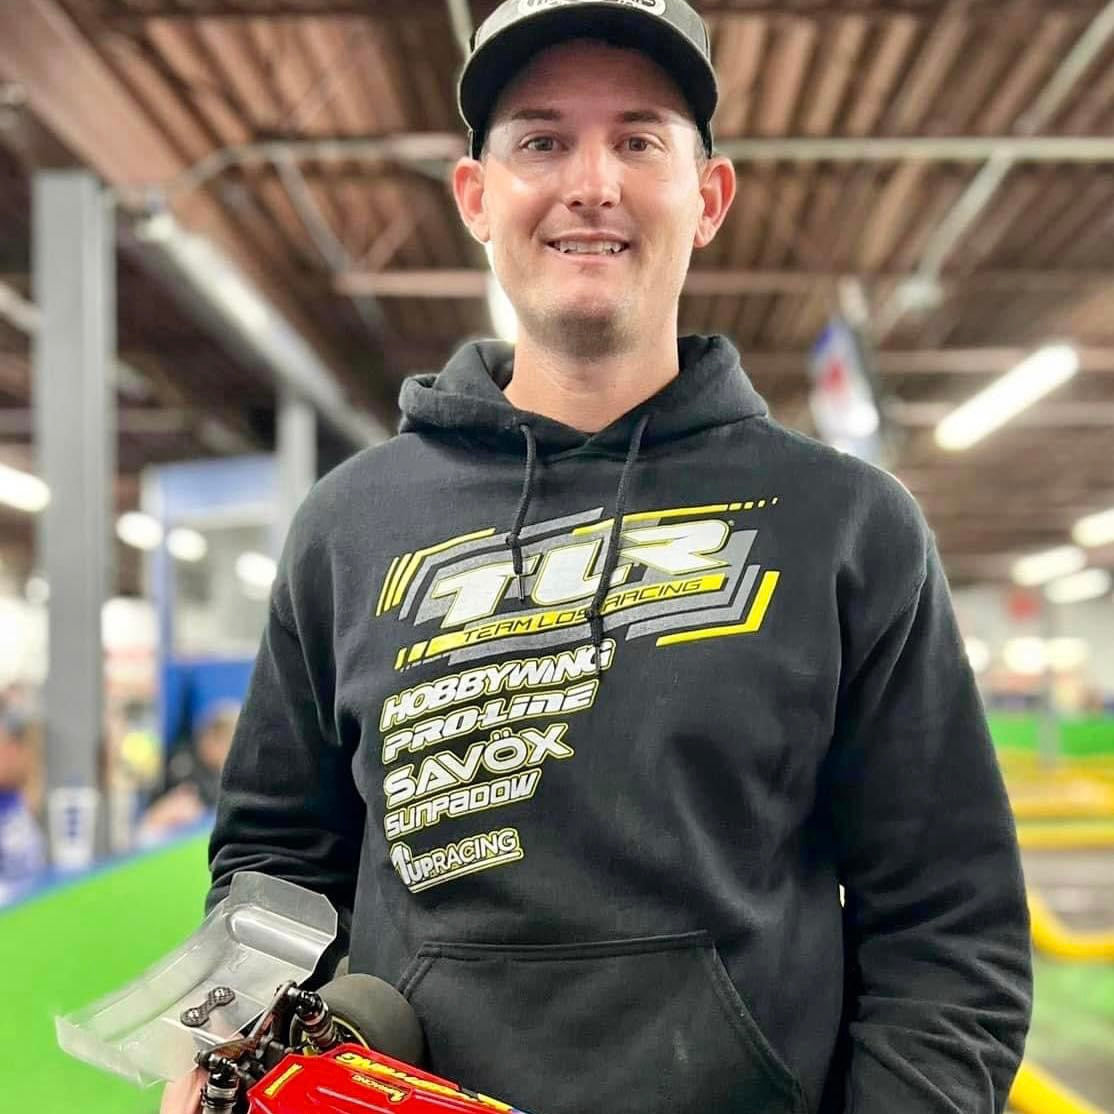 Wishing Ryan Cavalieri luck at the Team Associated Race at Trackside Hobbies and Raceway